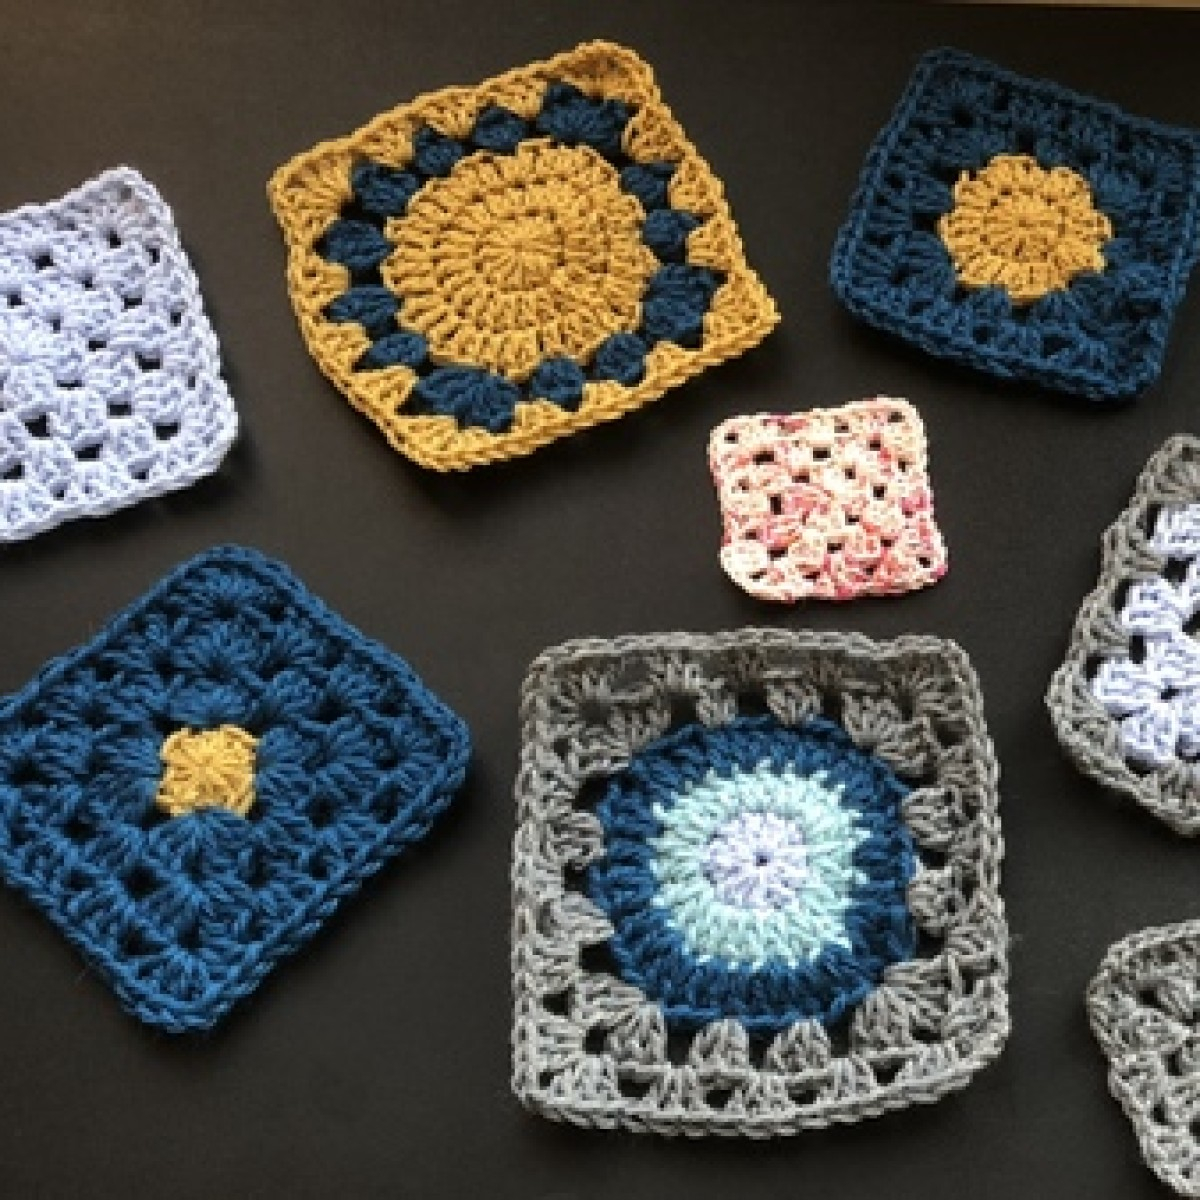 Crochet Squares Patterns Turn Mismatched Granny Squares Into An Afghan A Step Step Photo